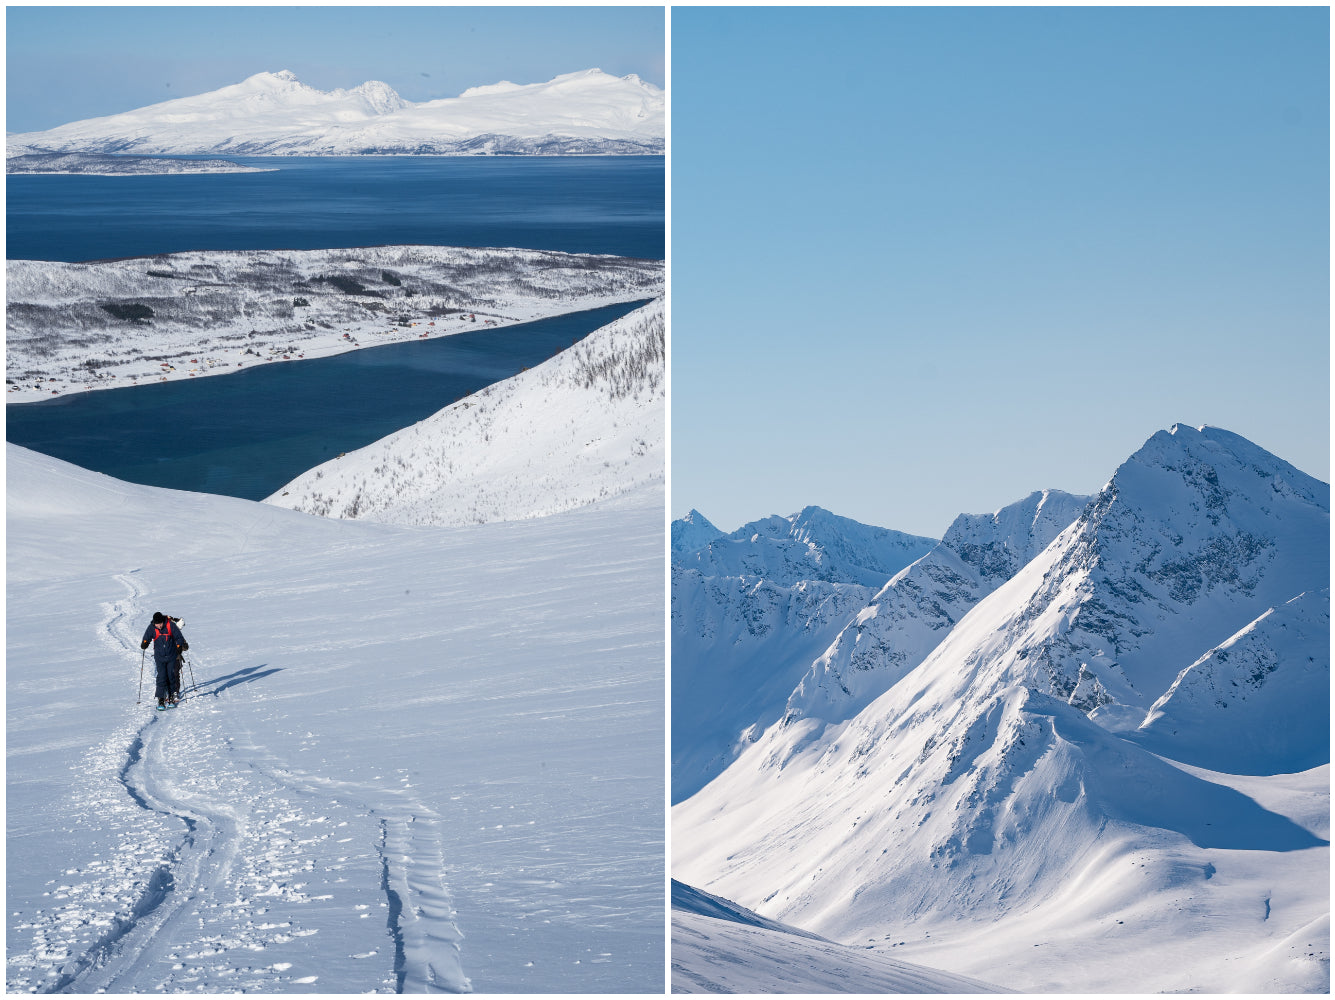 A skier touring on a beautiful sunny day in the snow-covered Lyngen Alps with the Lyngen Fjord in the background.